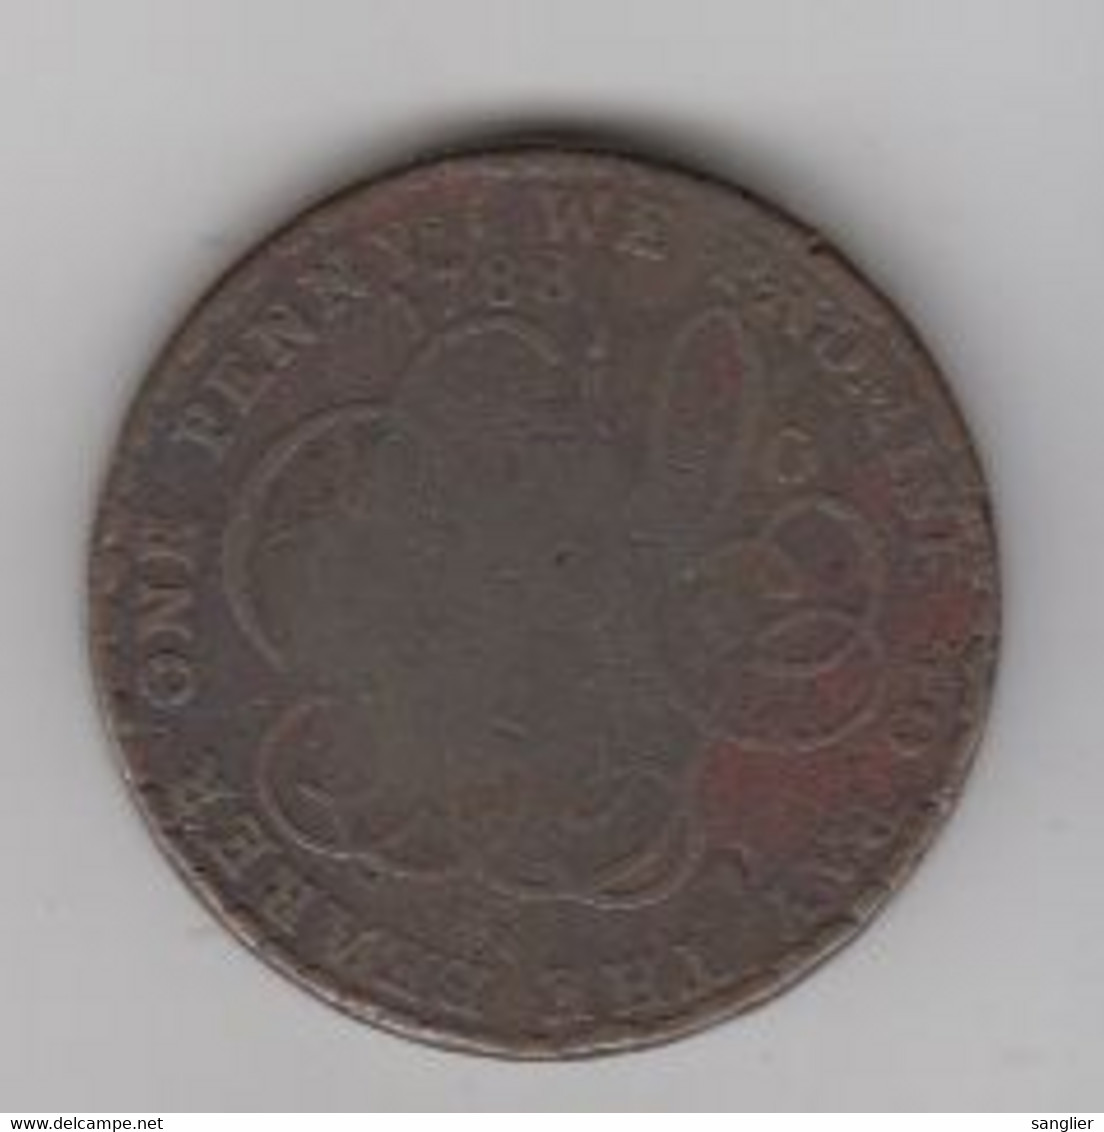 ONE PENNY 1788 - One Penny Parys Mine Company Thomas Williams 1788 Counterstamped - B. 1 Farthing